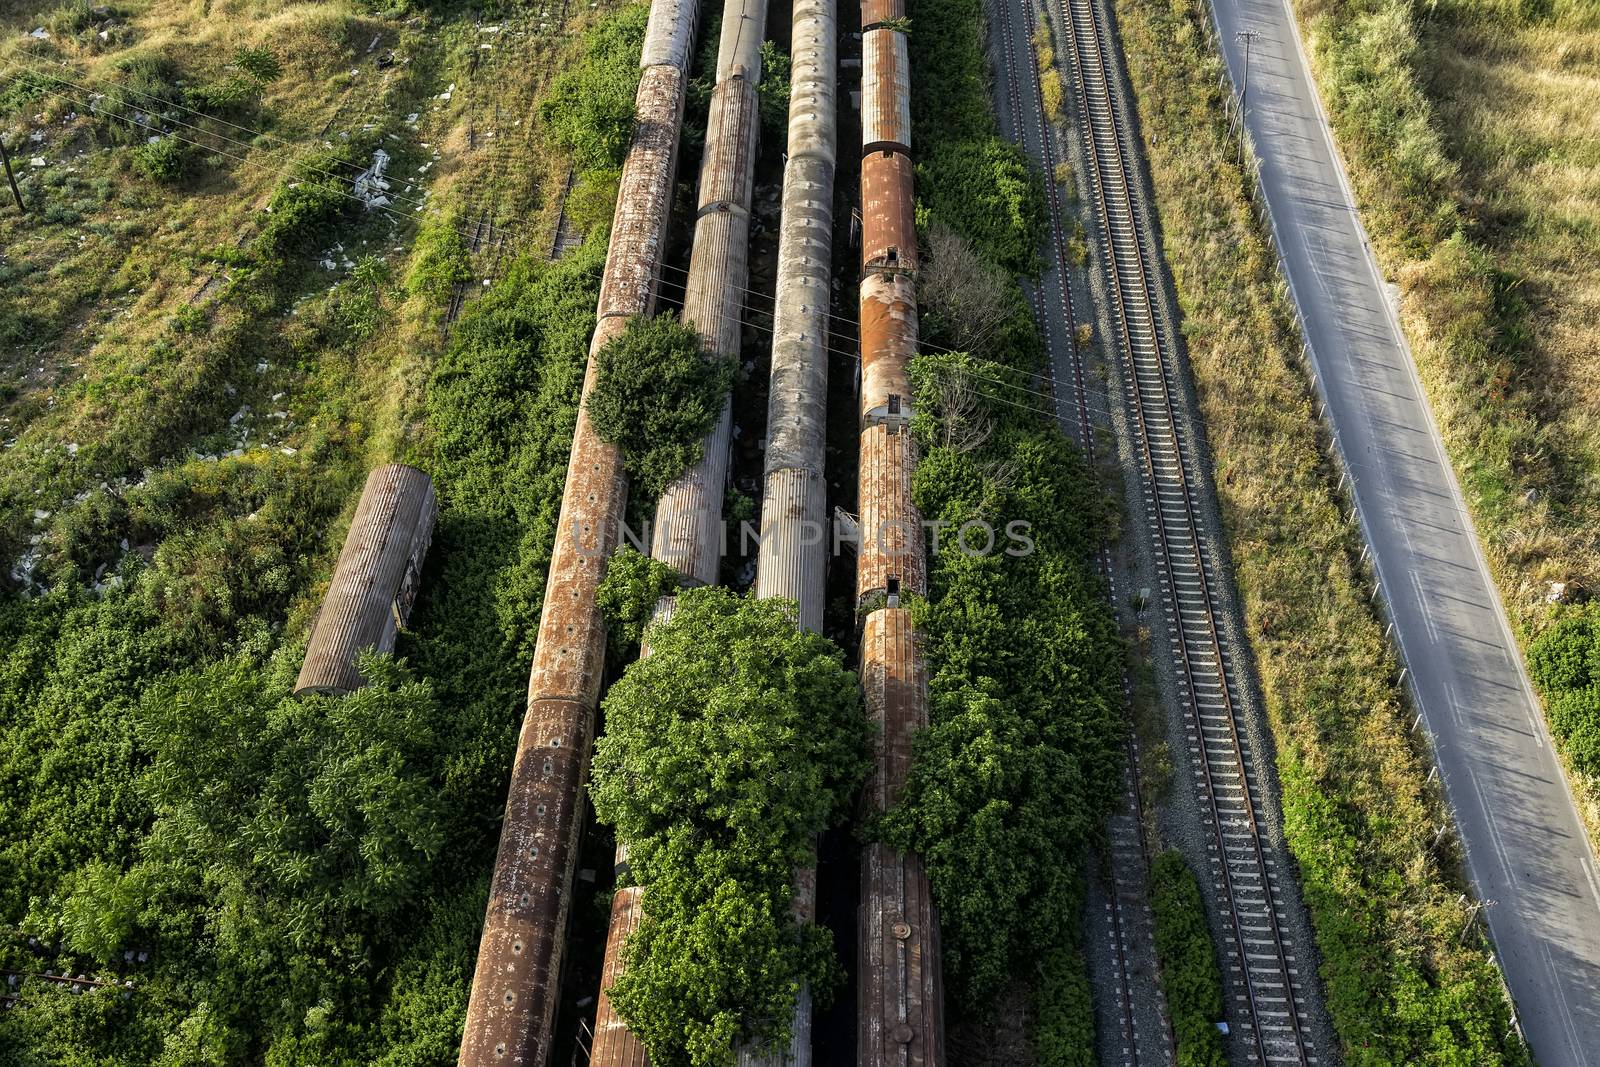 Aerial view of cemetery trains in Nea Ionia, Thessaloniki by ververidis